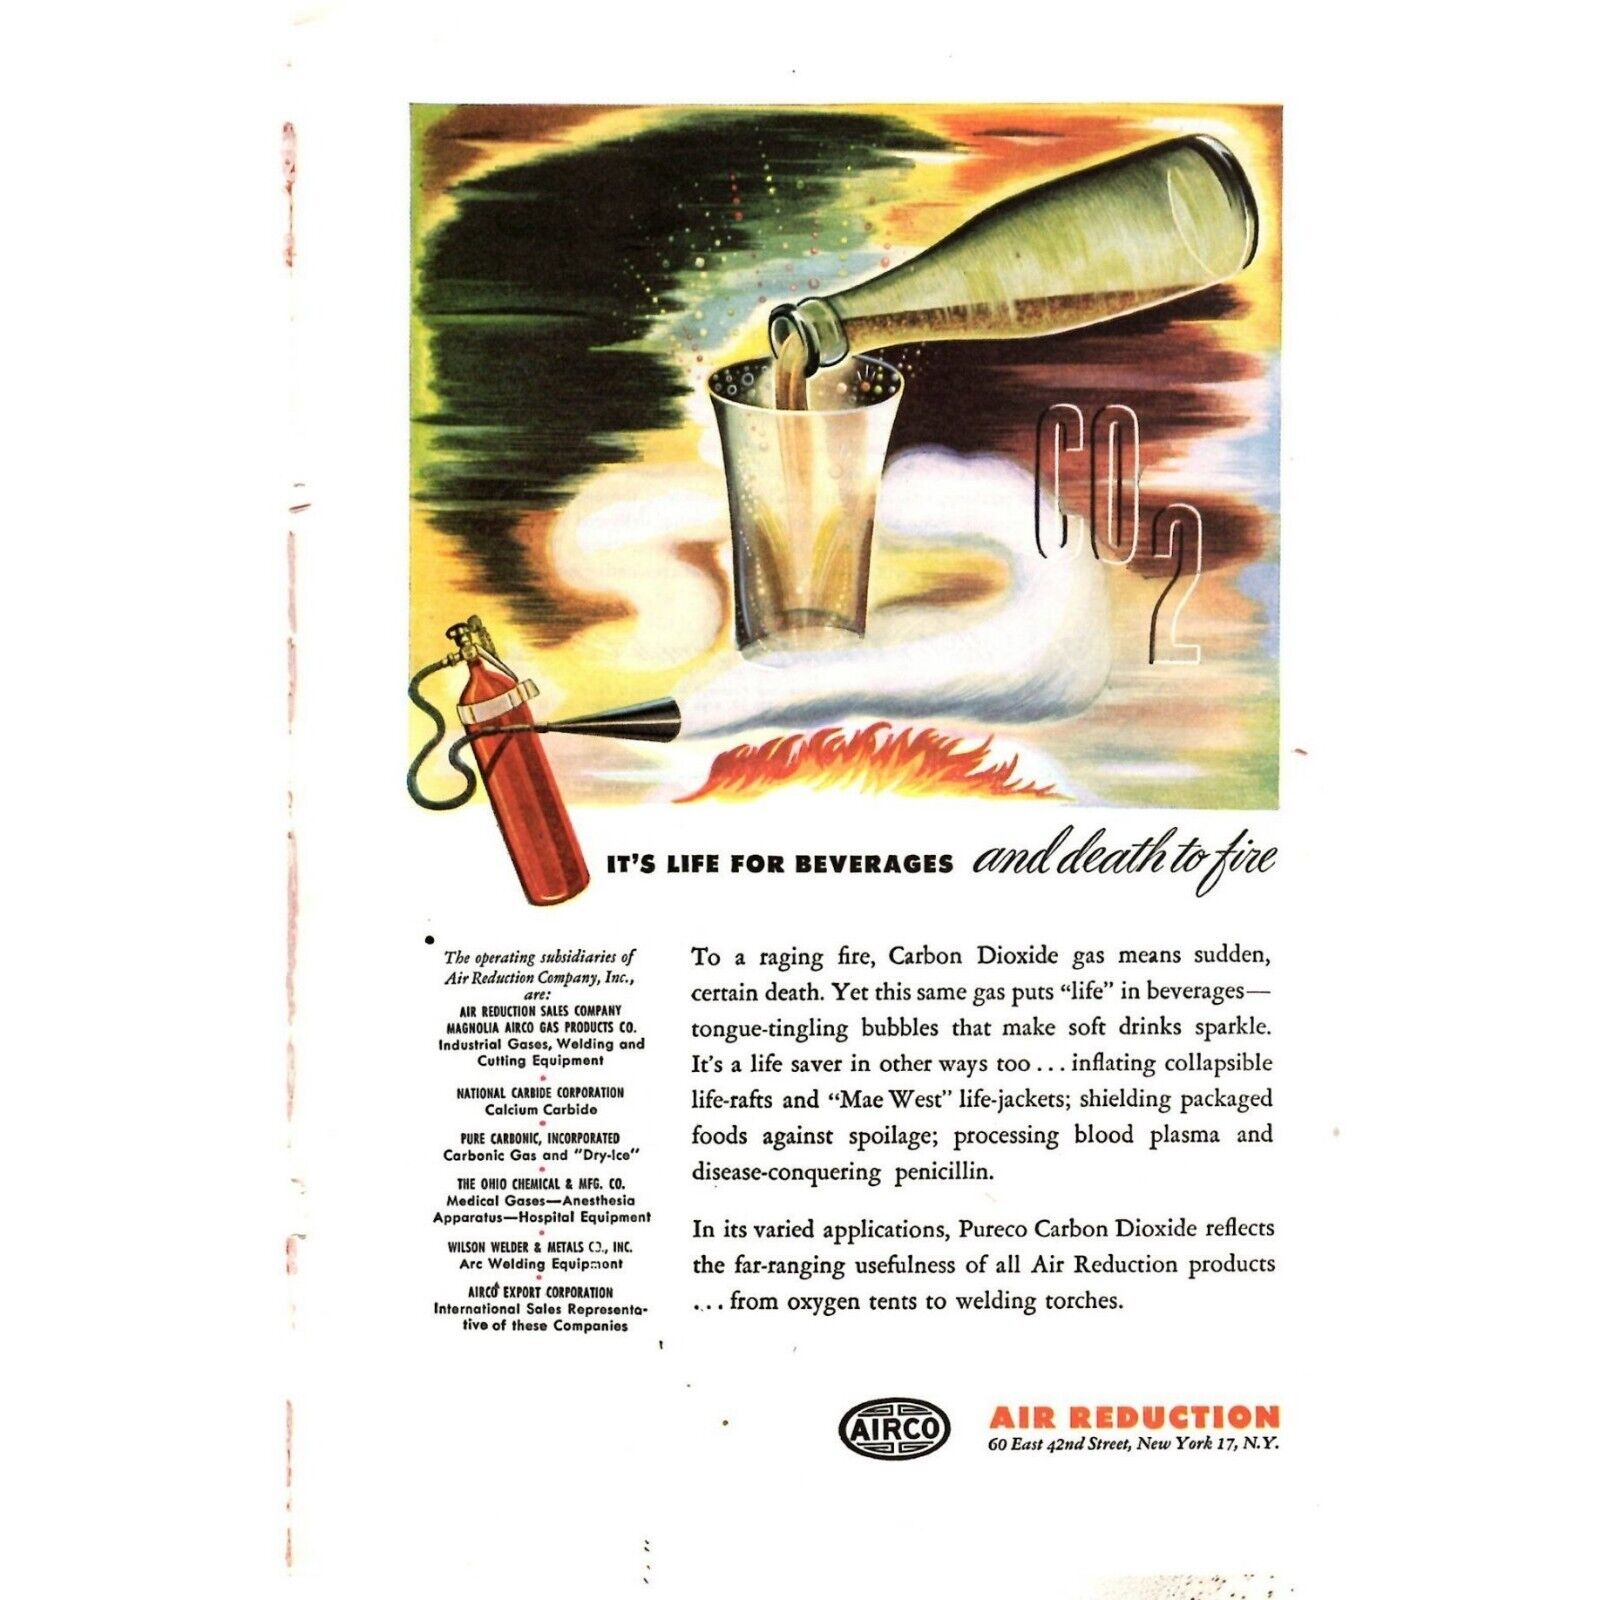 1946 Airco Air Reduction Print Ad CO2 It's Life for Beverages & Death for Fire